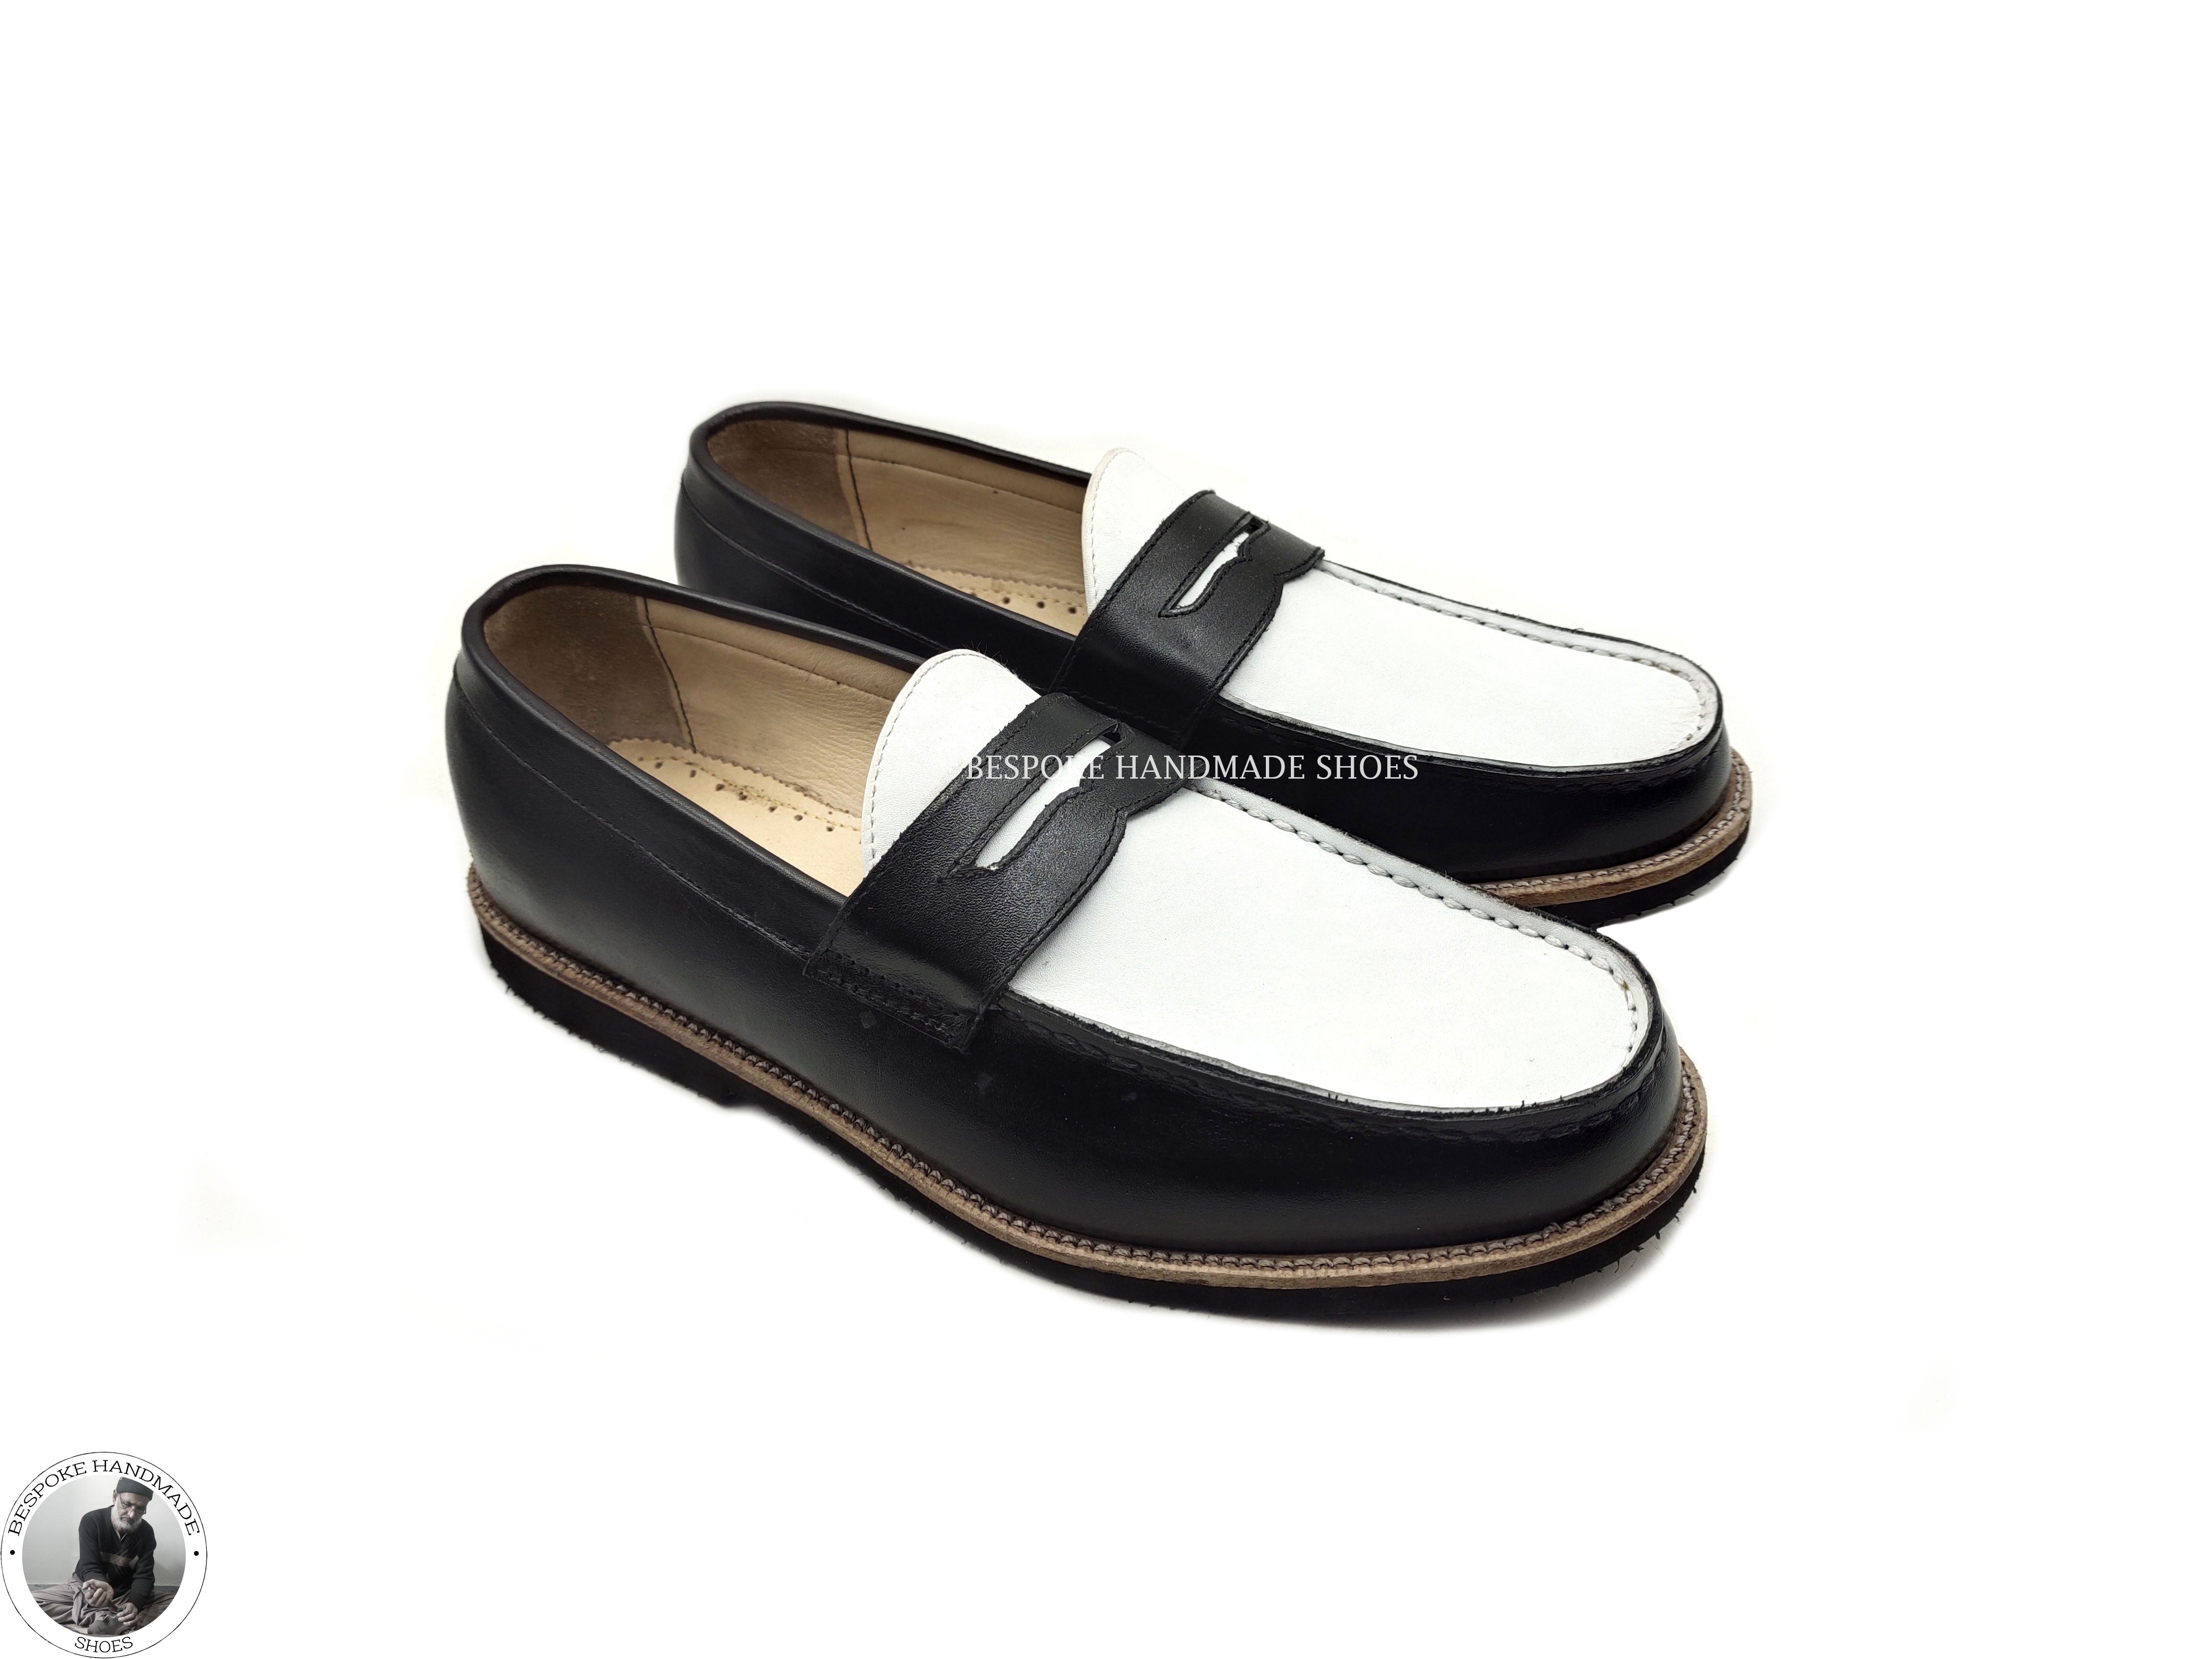 Buy Handmade Stylish Black and White Loafer Moccasin Slip on Dress/Formal Shoes